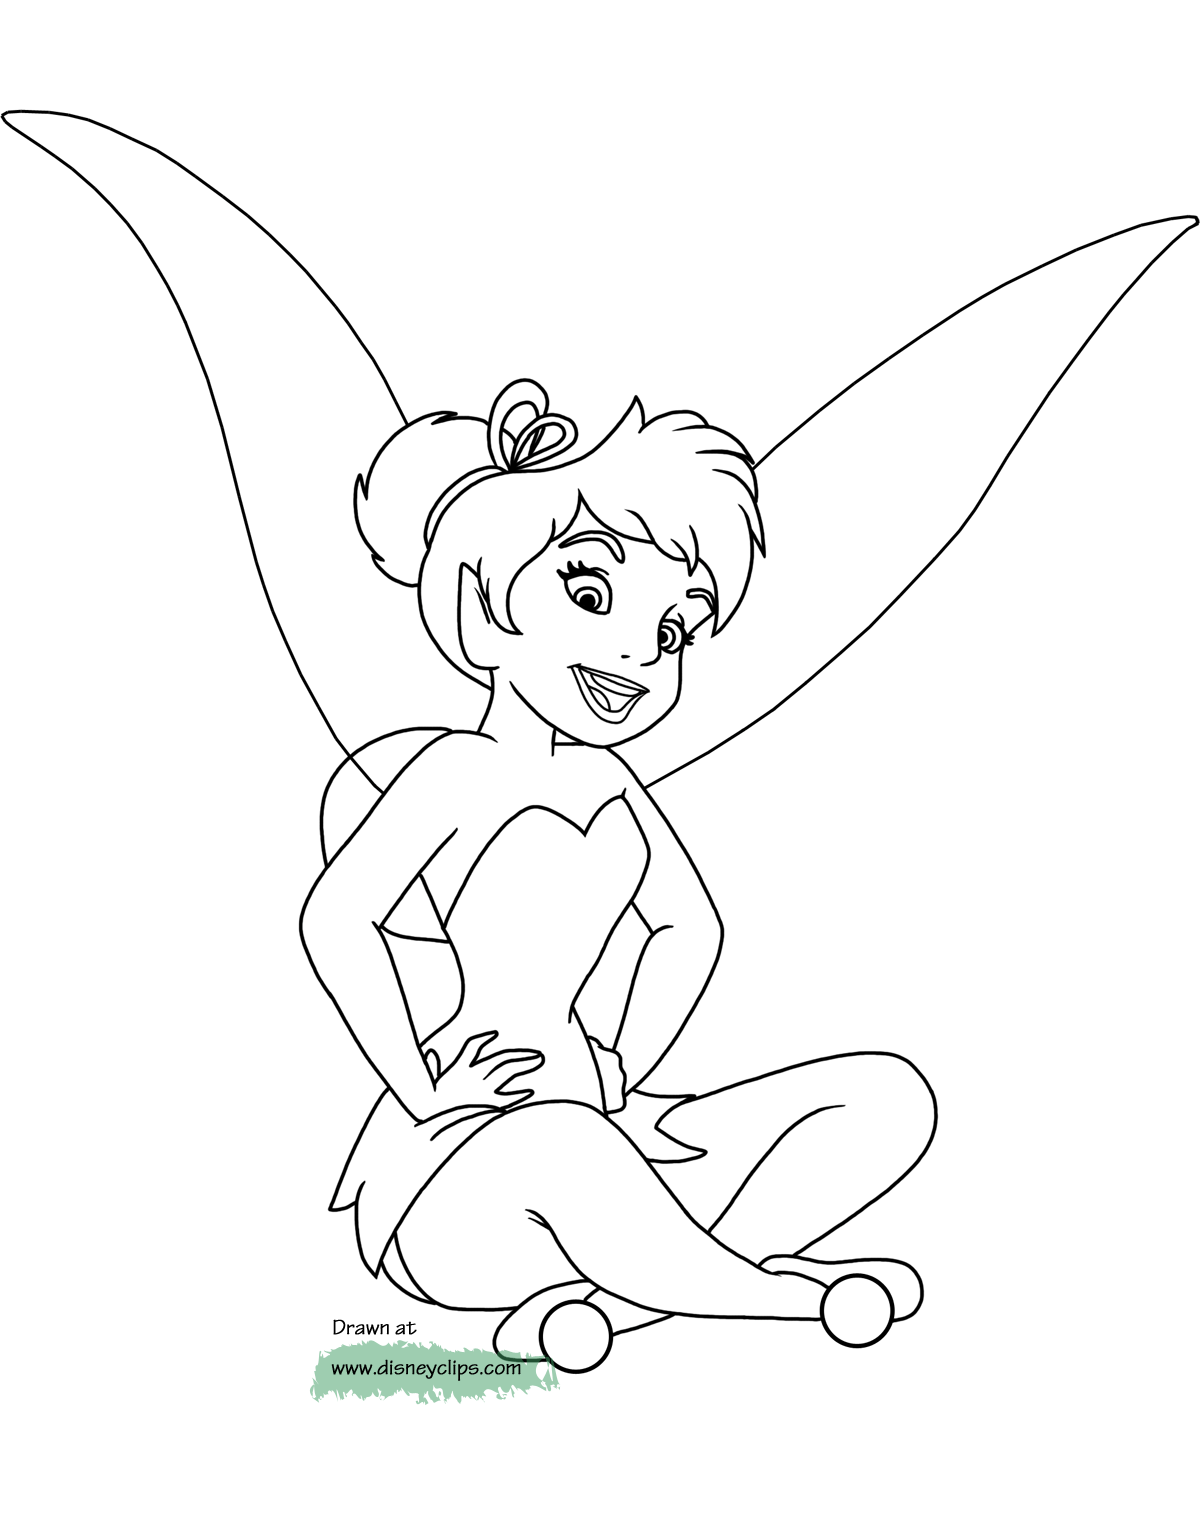 tinkerbell fairy coloring pages fairy coloring pages fairy coloring angel coloring fairy coloring tinkerbell pages 